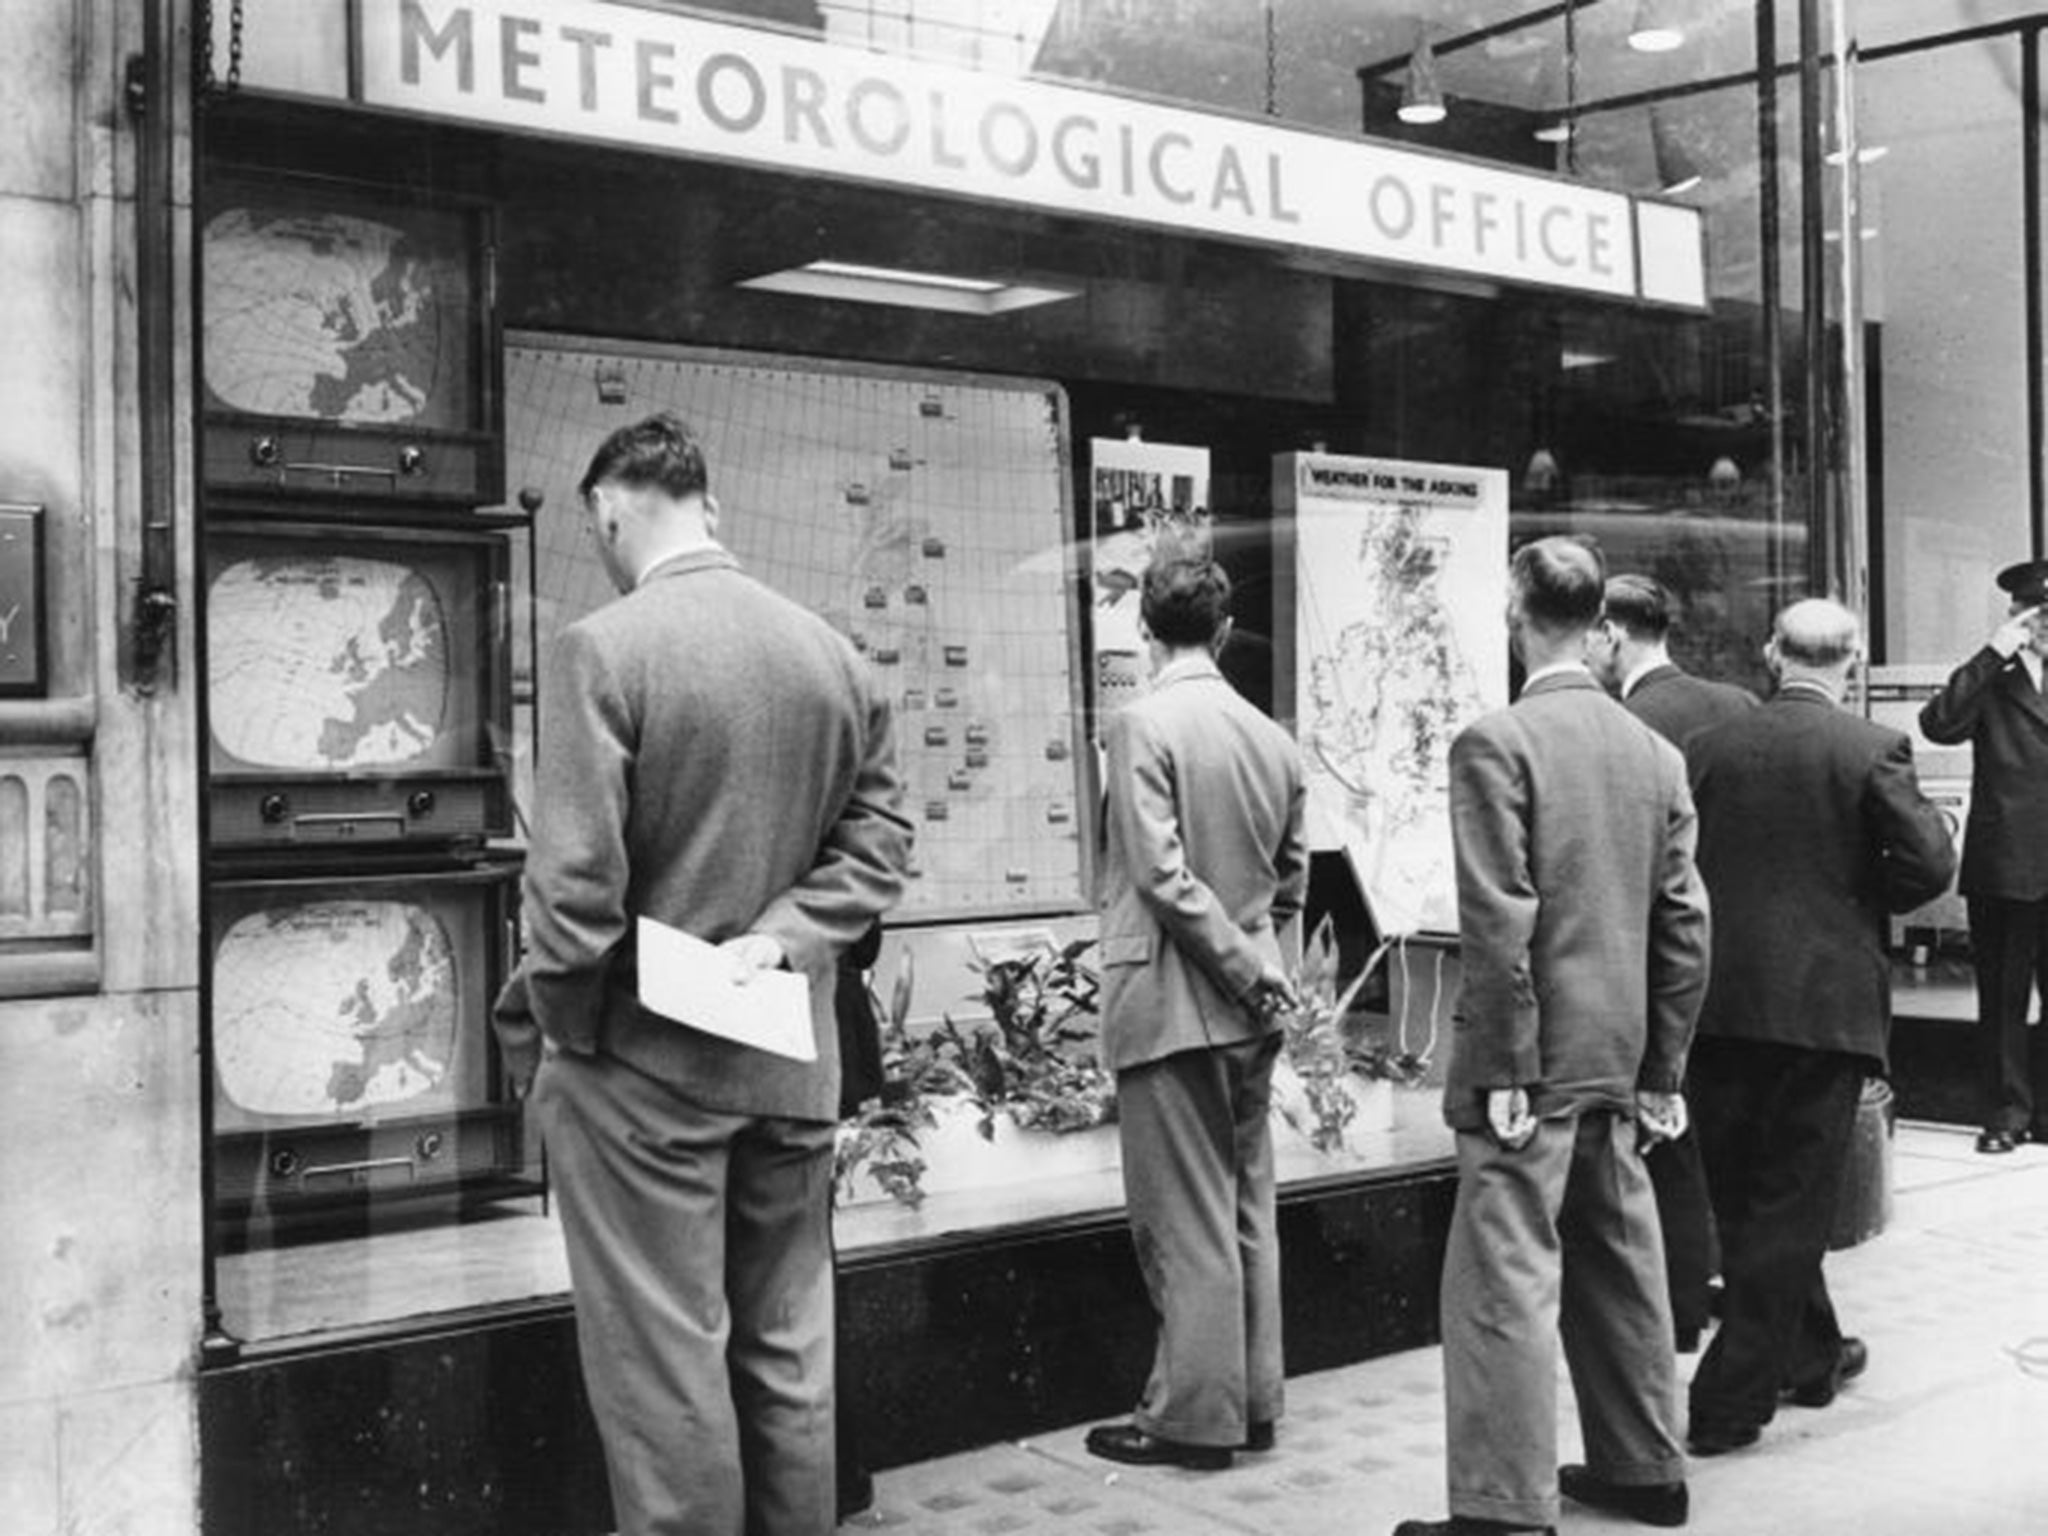 The Meteorological Office at Prince's House, Kingsway, London